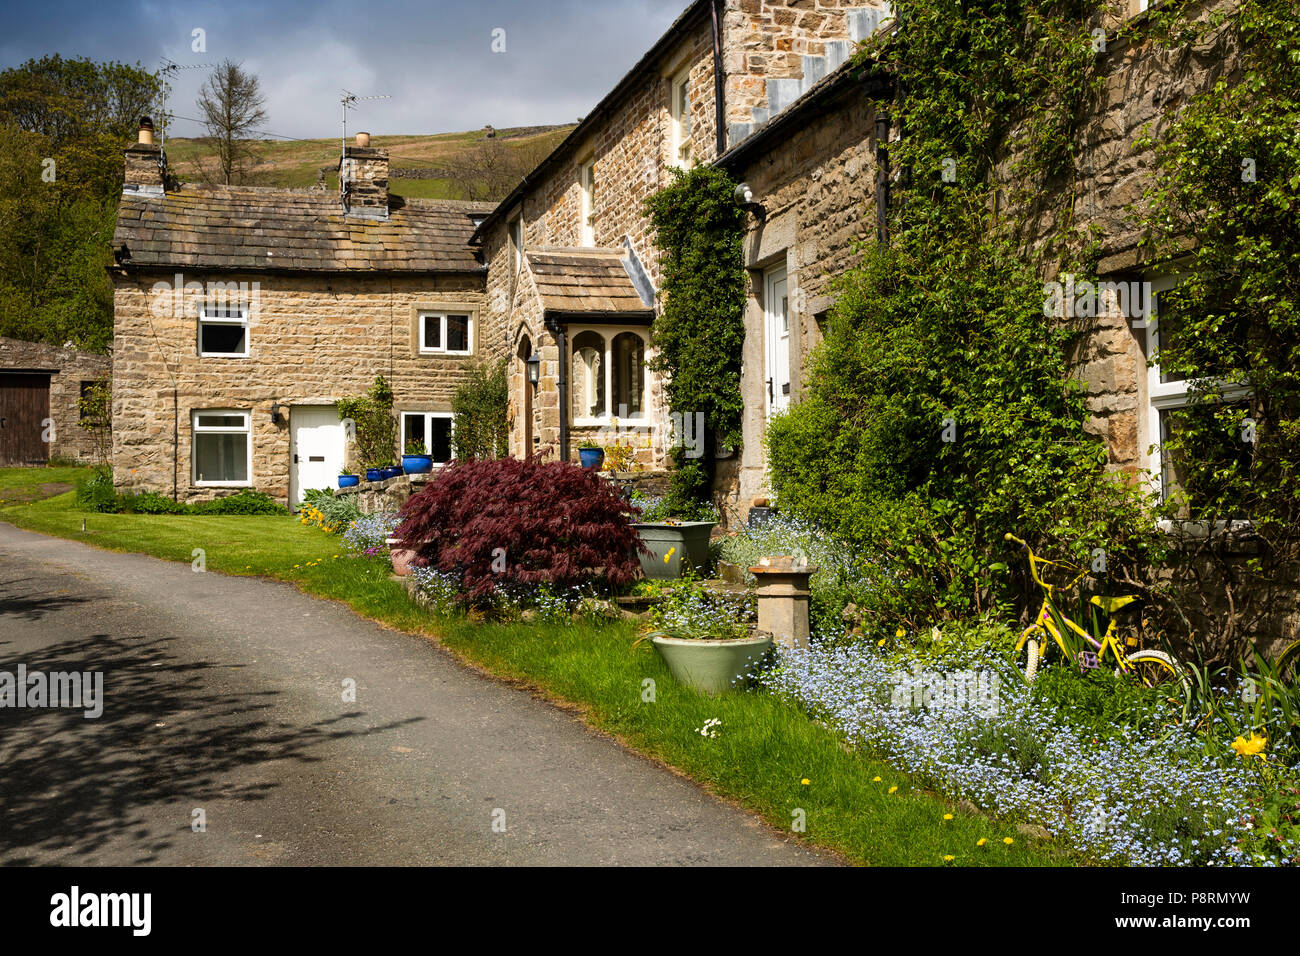 UK, England, Yorkshire, Swaledale, Healaugh, colourful flowers in small front garden of village house Stock Photo